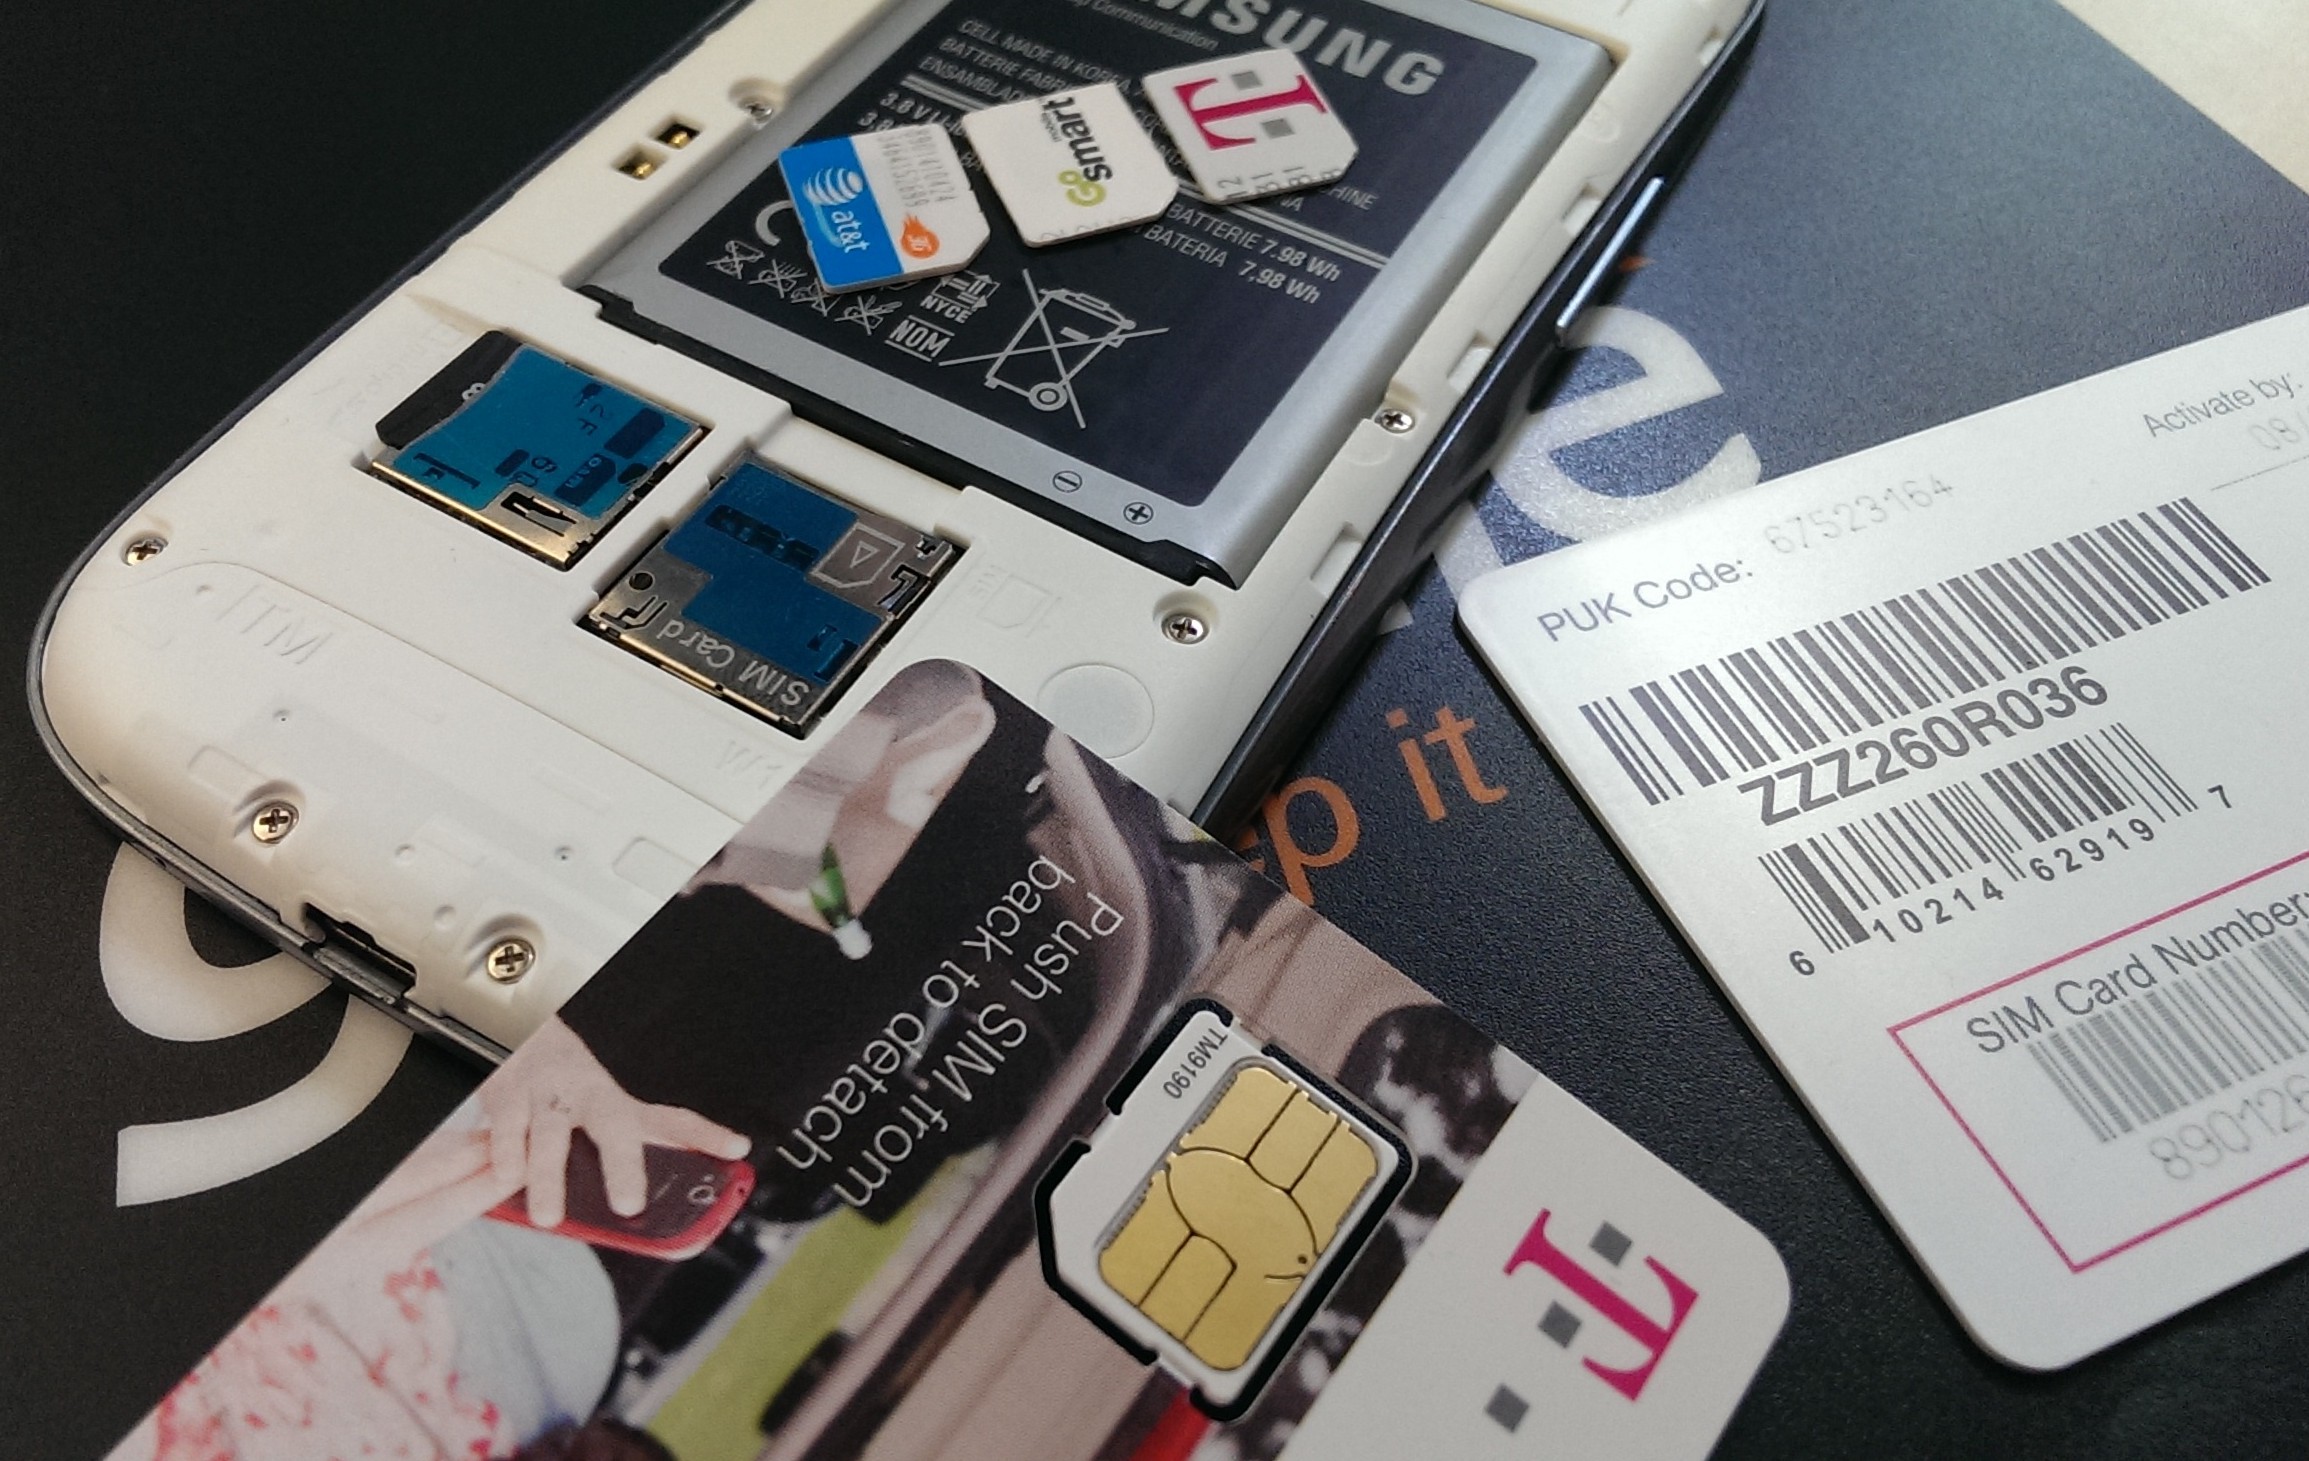 How To Remove Your Sim Card From Your Galaxy Smartphone